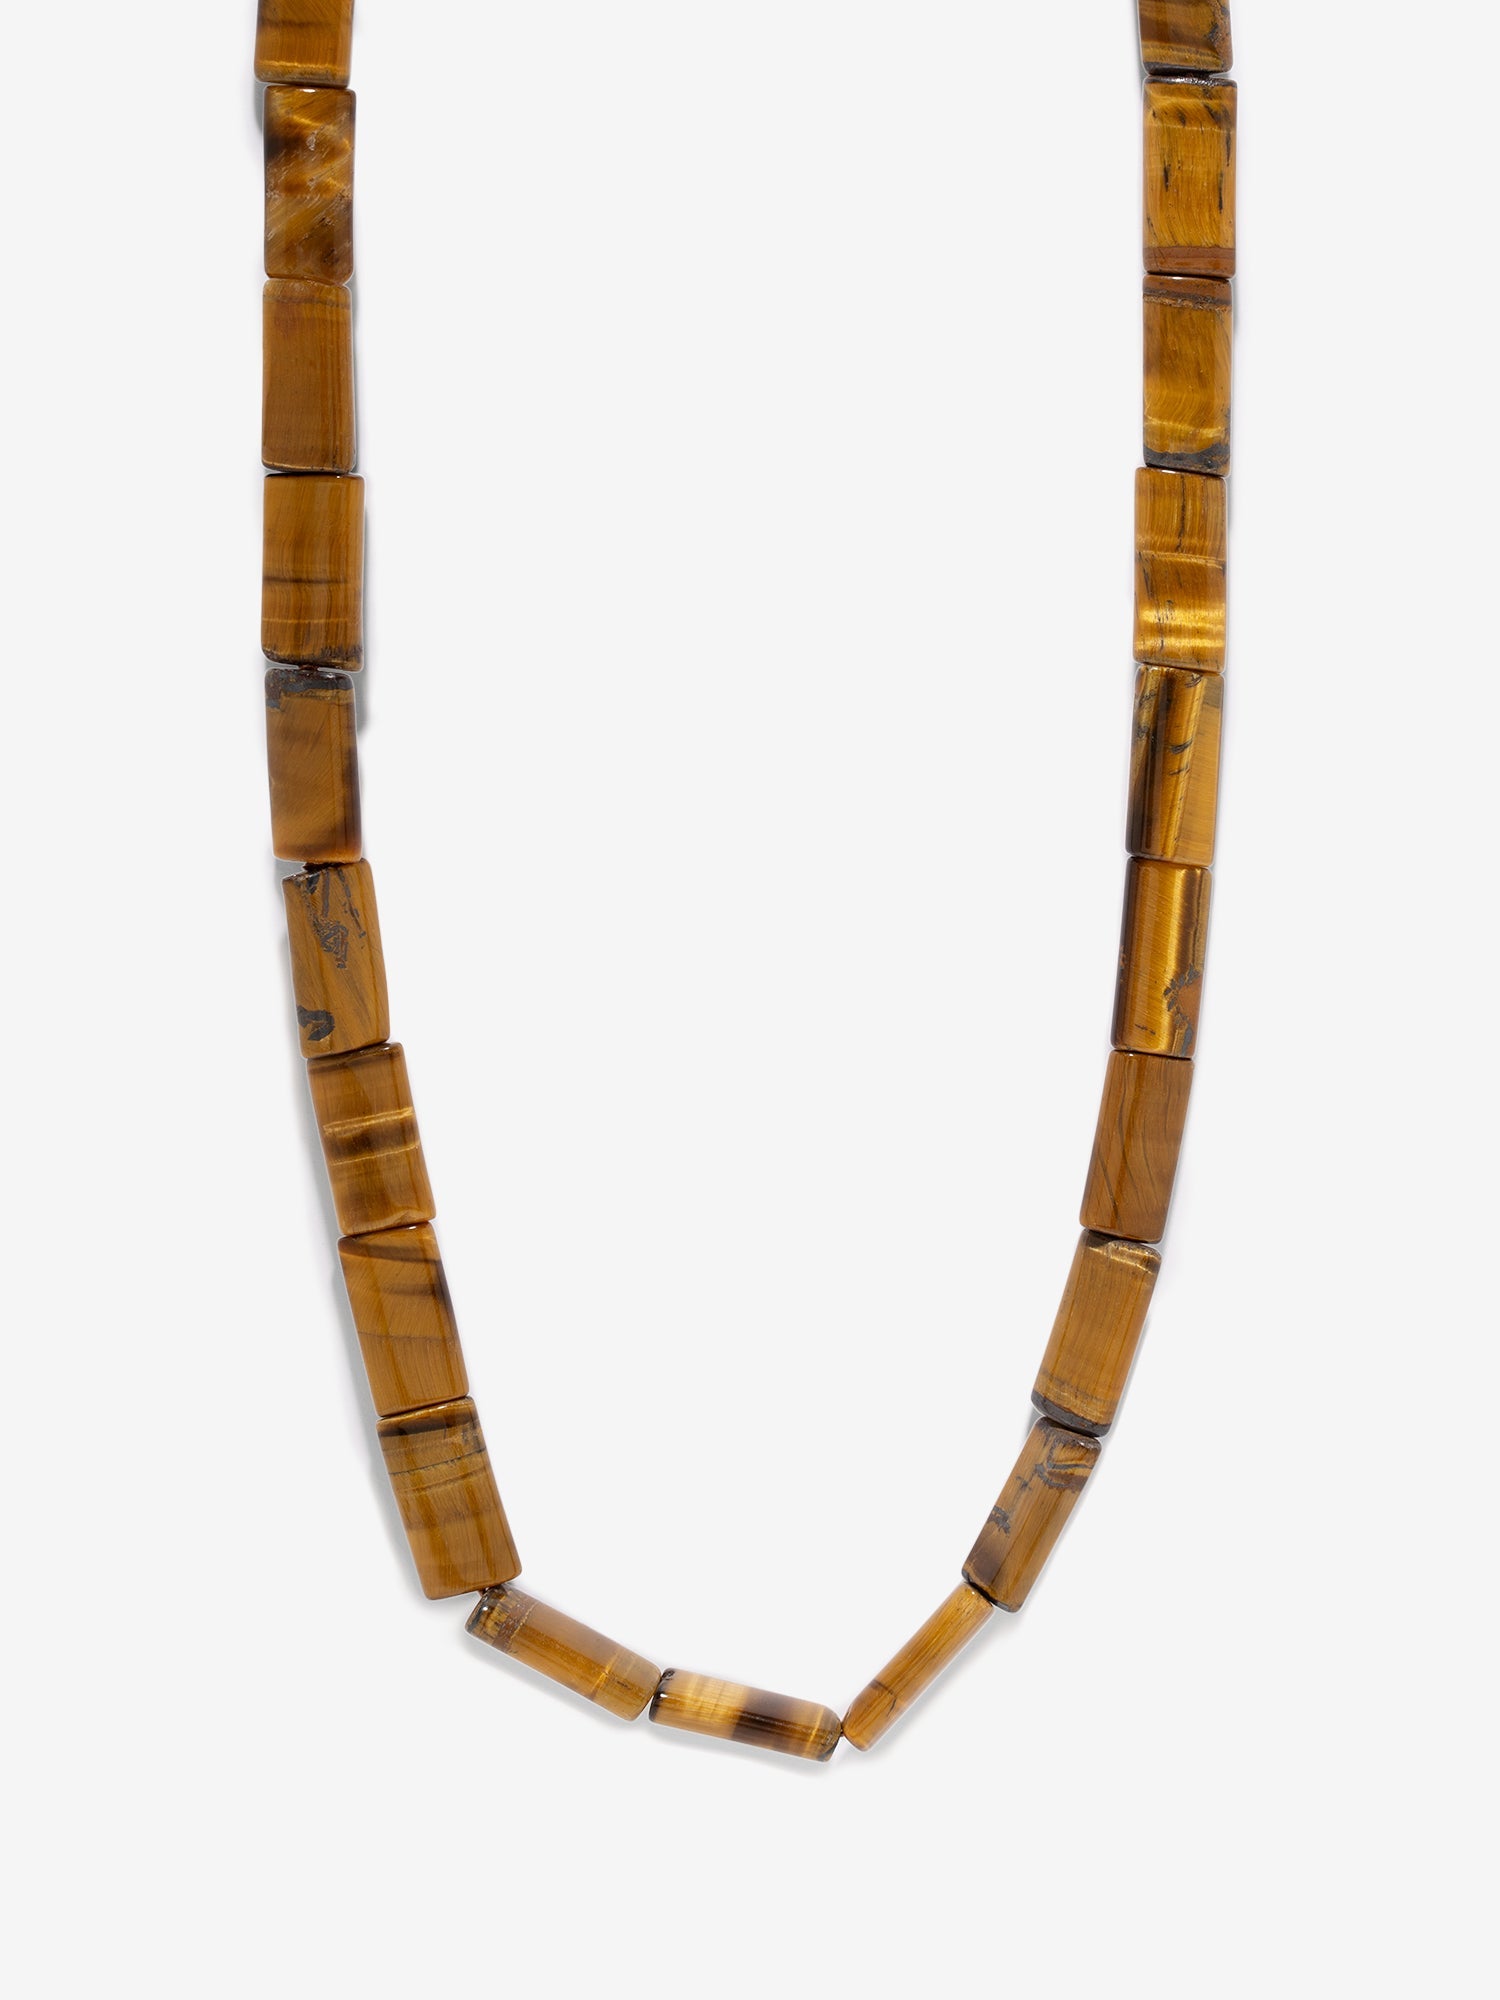 Tiger's Eye Bead Necklace